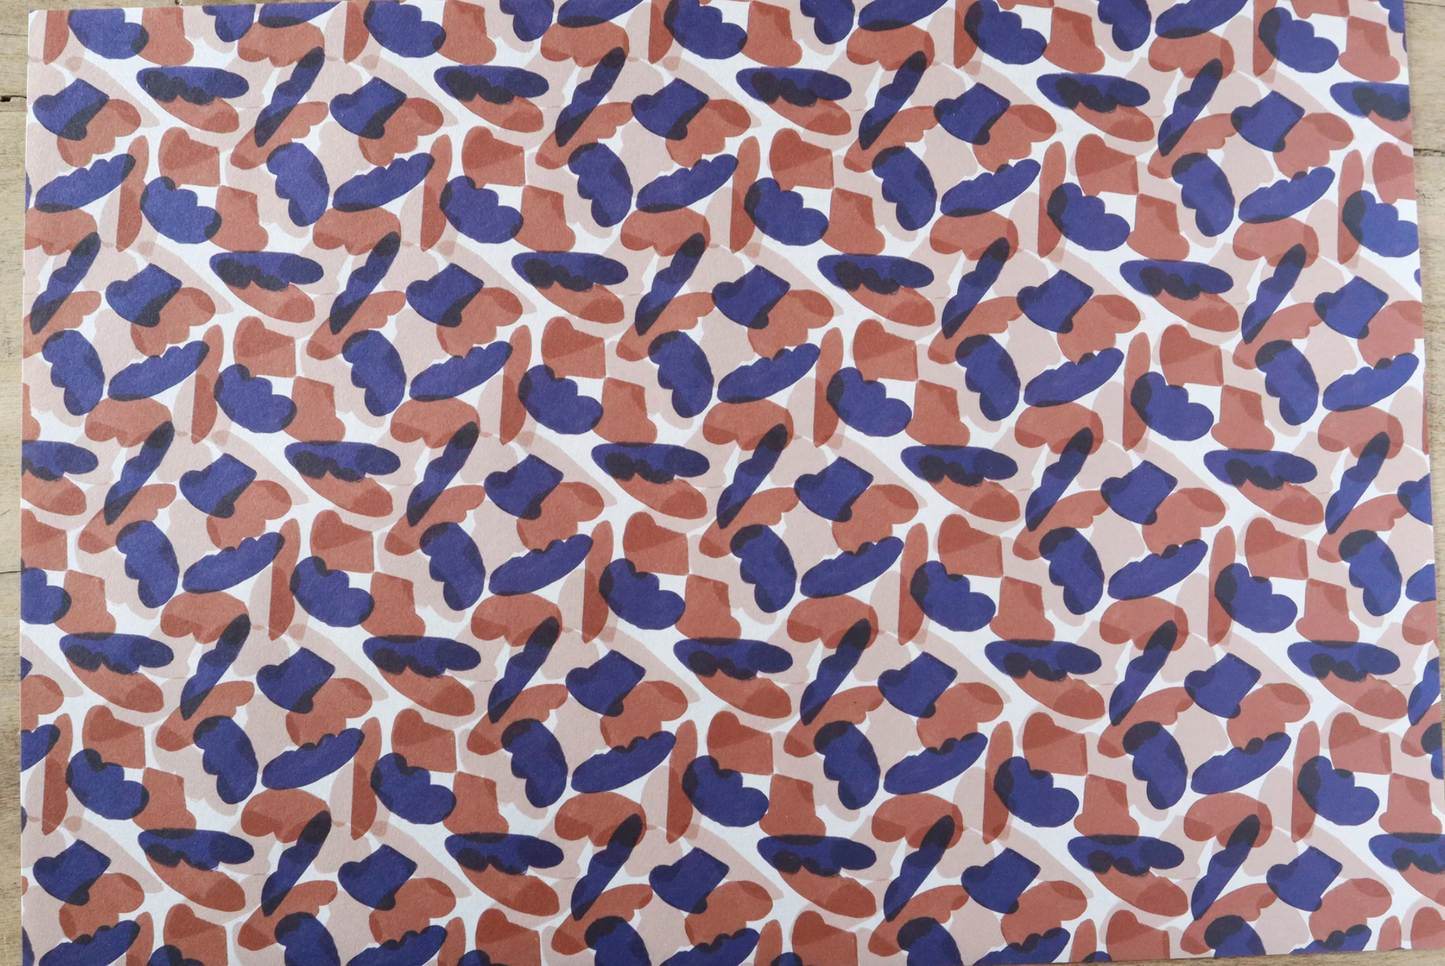 Bread Pattern Blue and Brown Wrapping Paper · Regaro Papiro